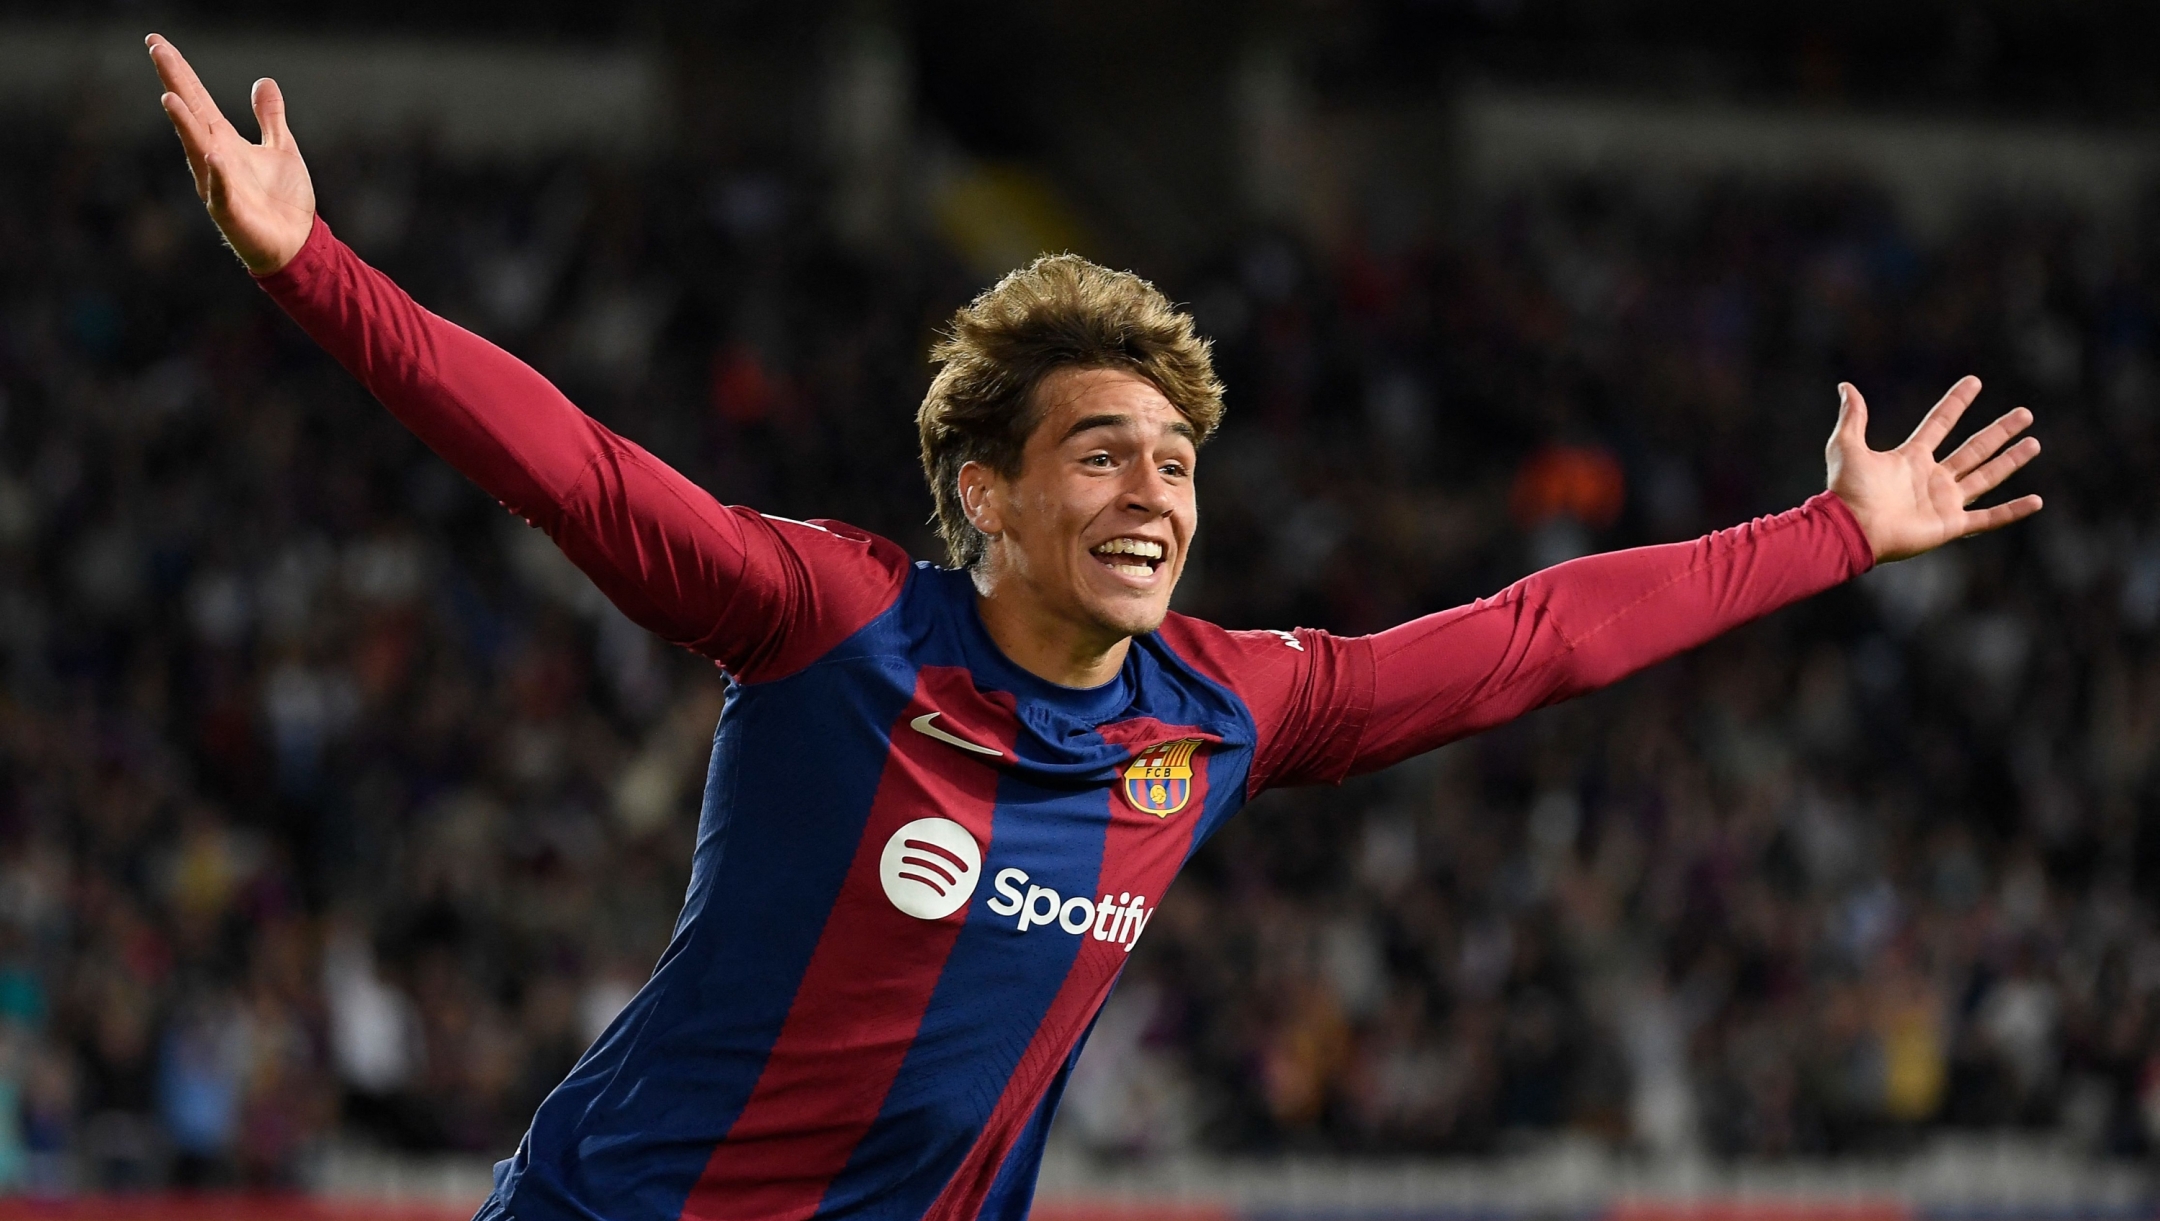 Barcelona's Spanish forward #38 Marc Guiu celebrates after scoring his team's first goal during the Spanish league football match between FC Barcelona and Athletic Club Bilbao at the Estadi Olimpic Lluis Companys in Barcelona on October 22, 2023. (Photo by Josep LAGO / AFP)